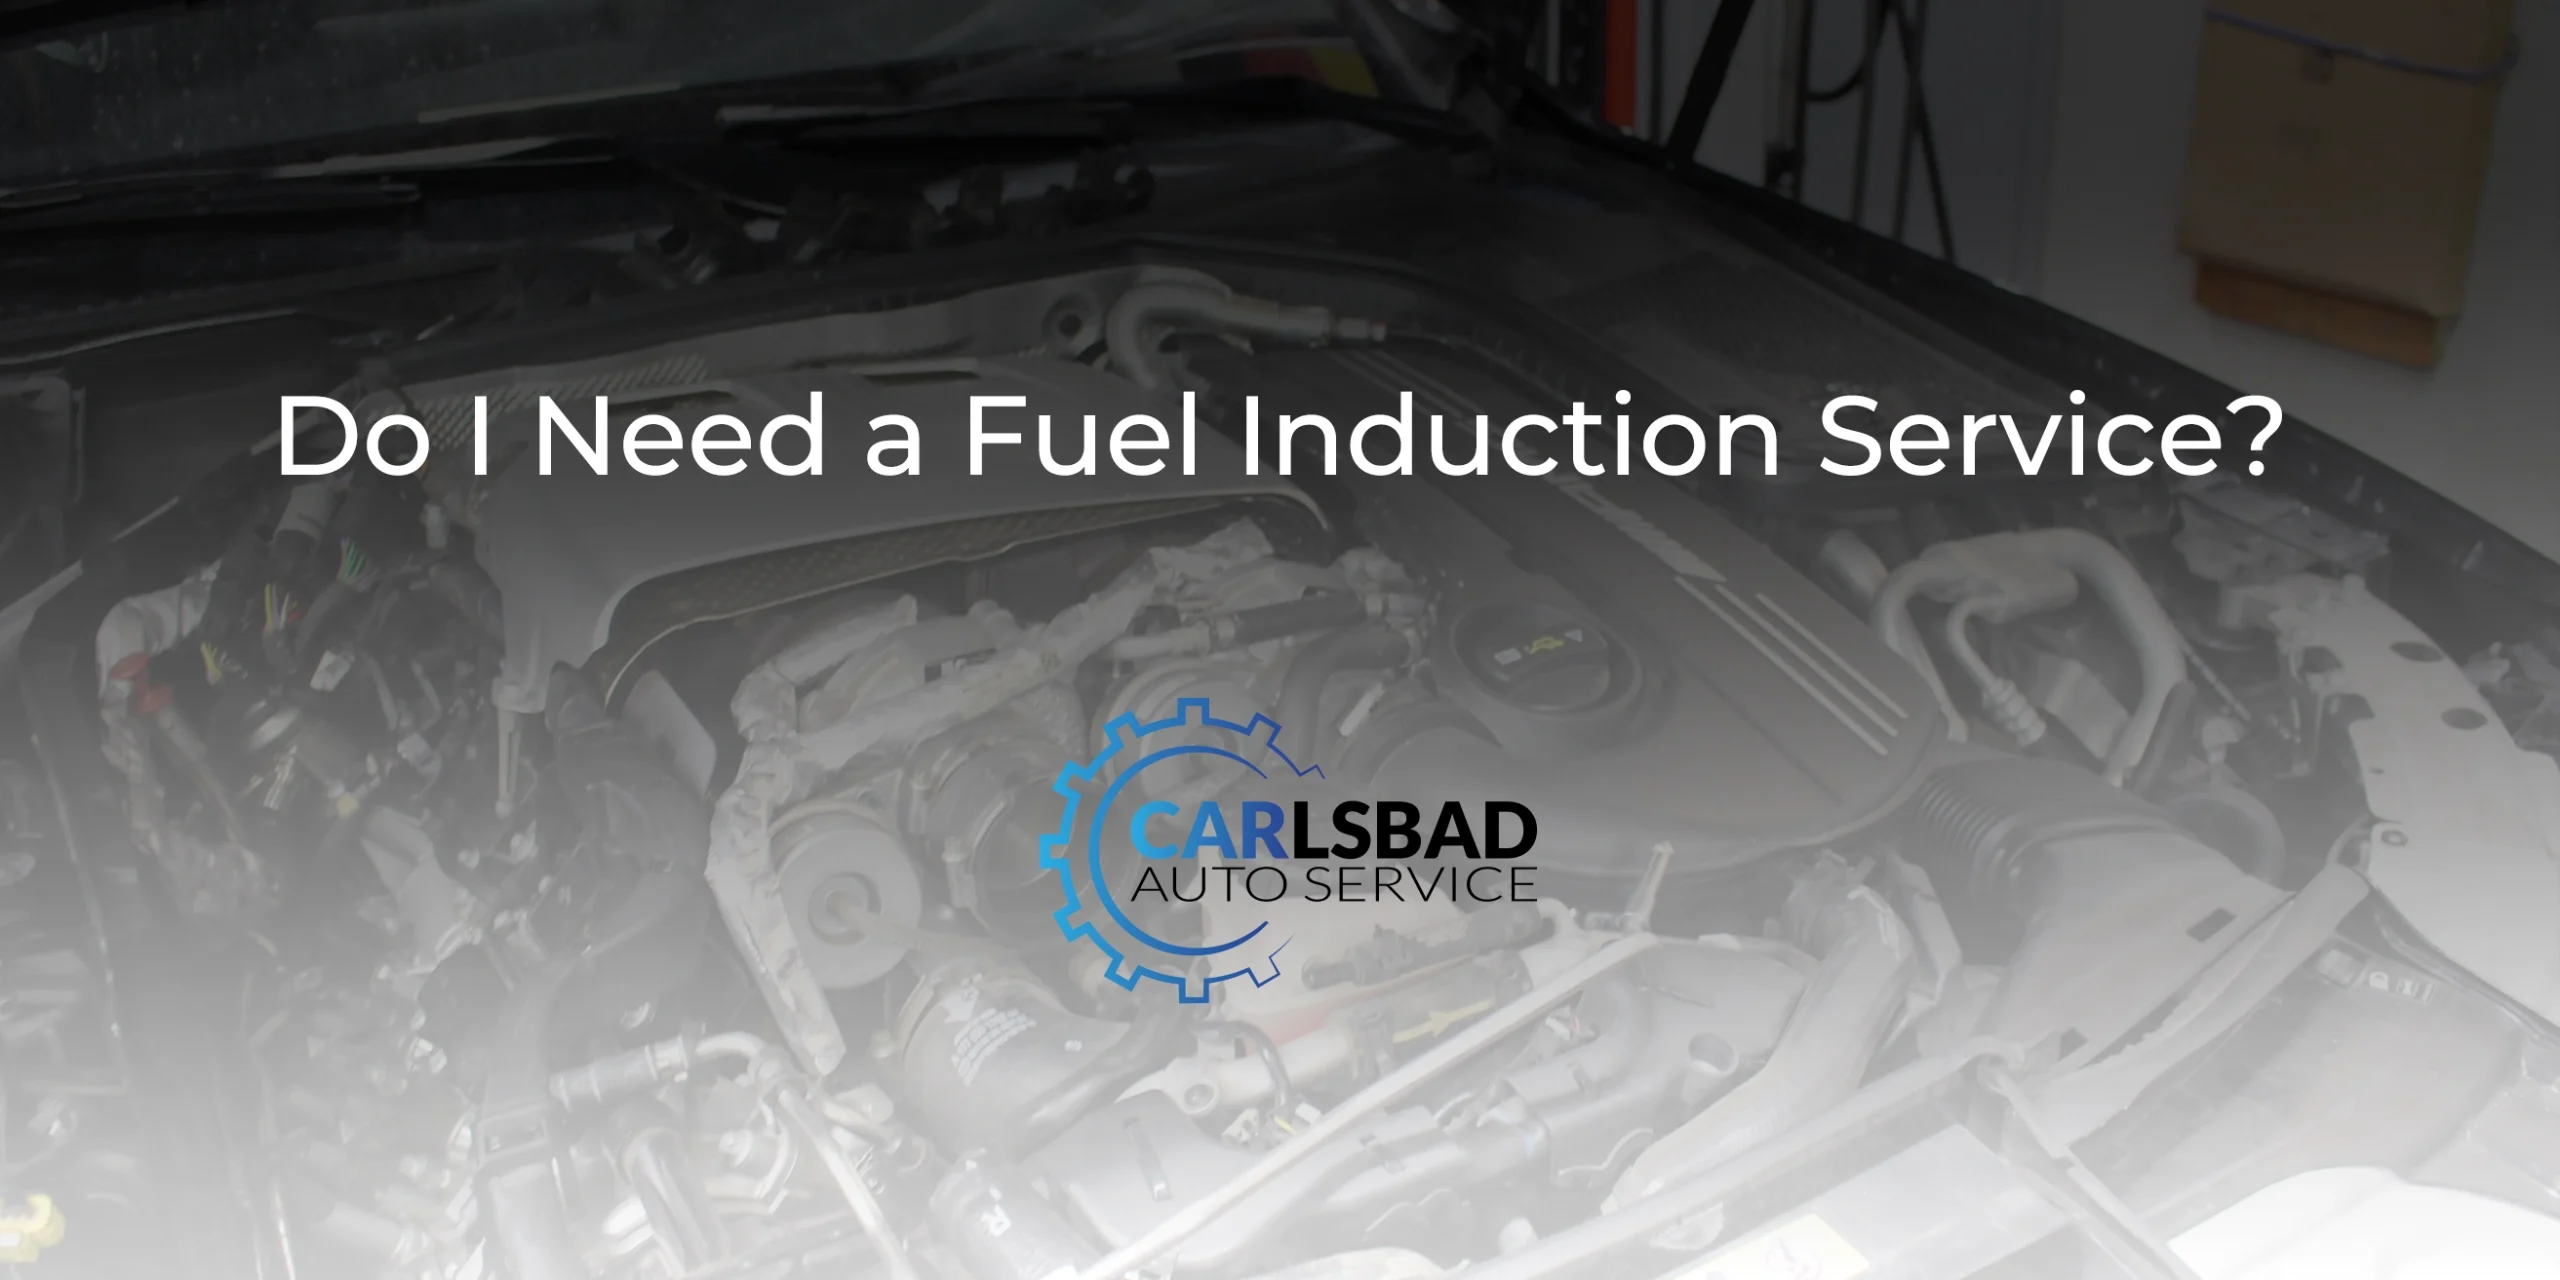 Do I Need a Fuel Induction Service?